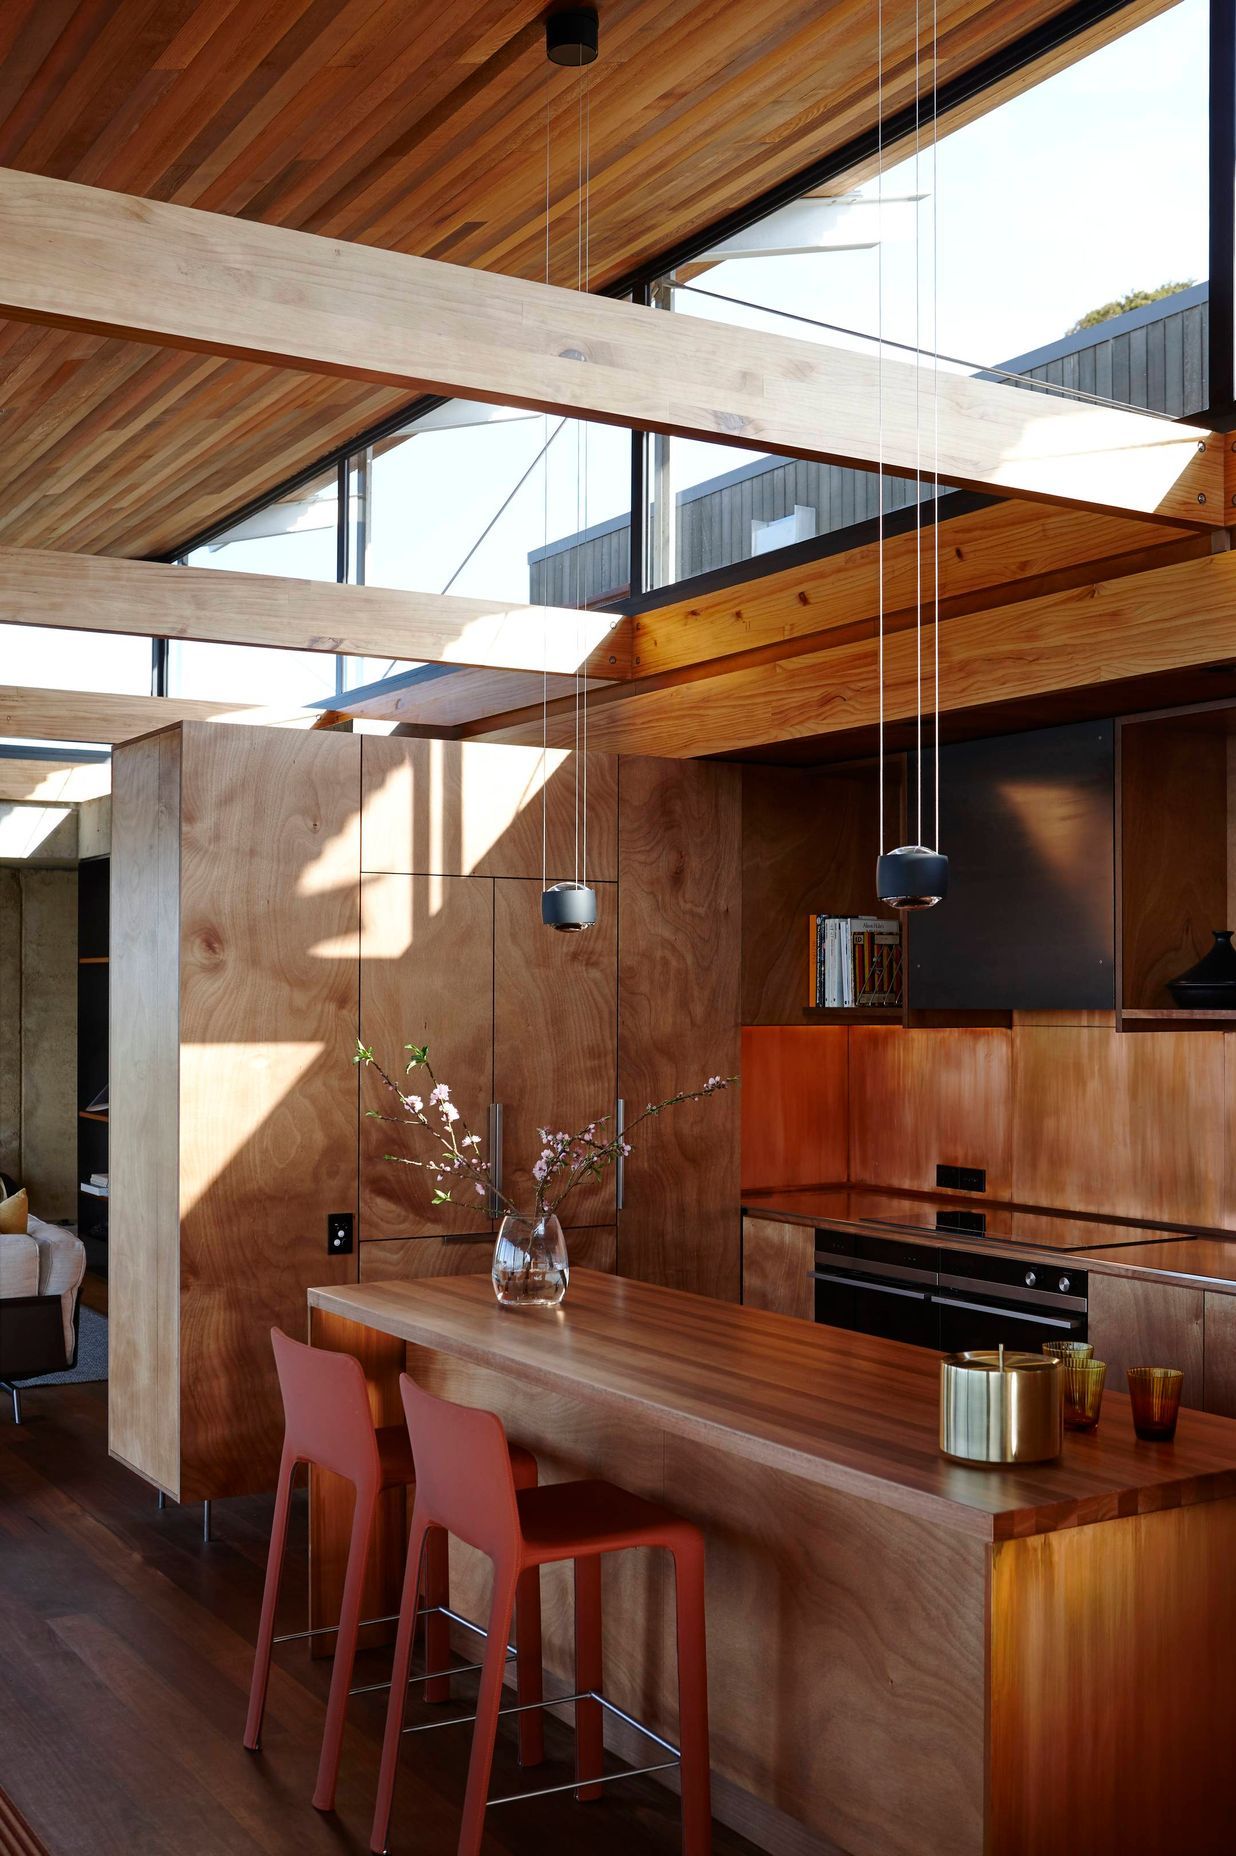 Timber and copper create the warmest kitchen ever. Photograph by Jackie Meiring.